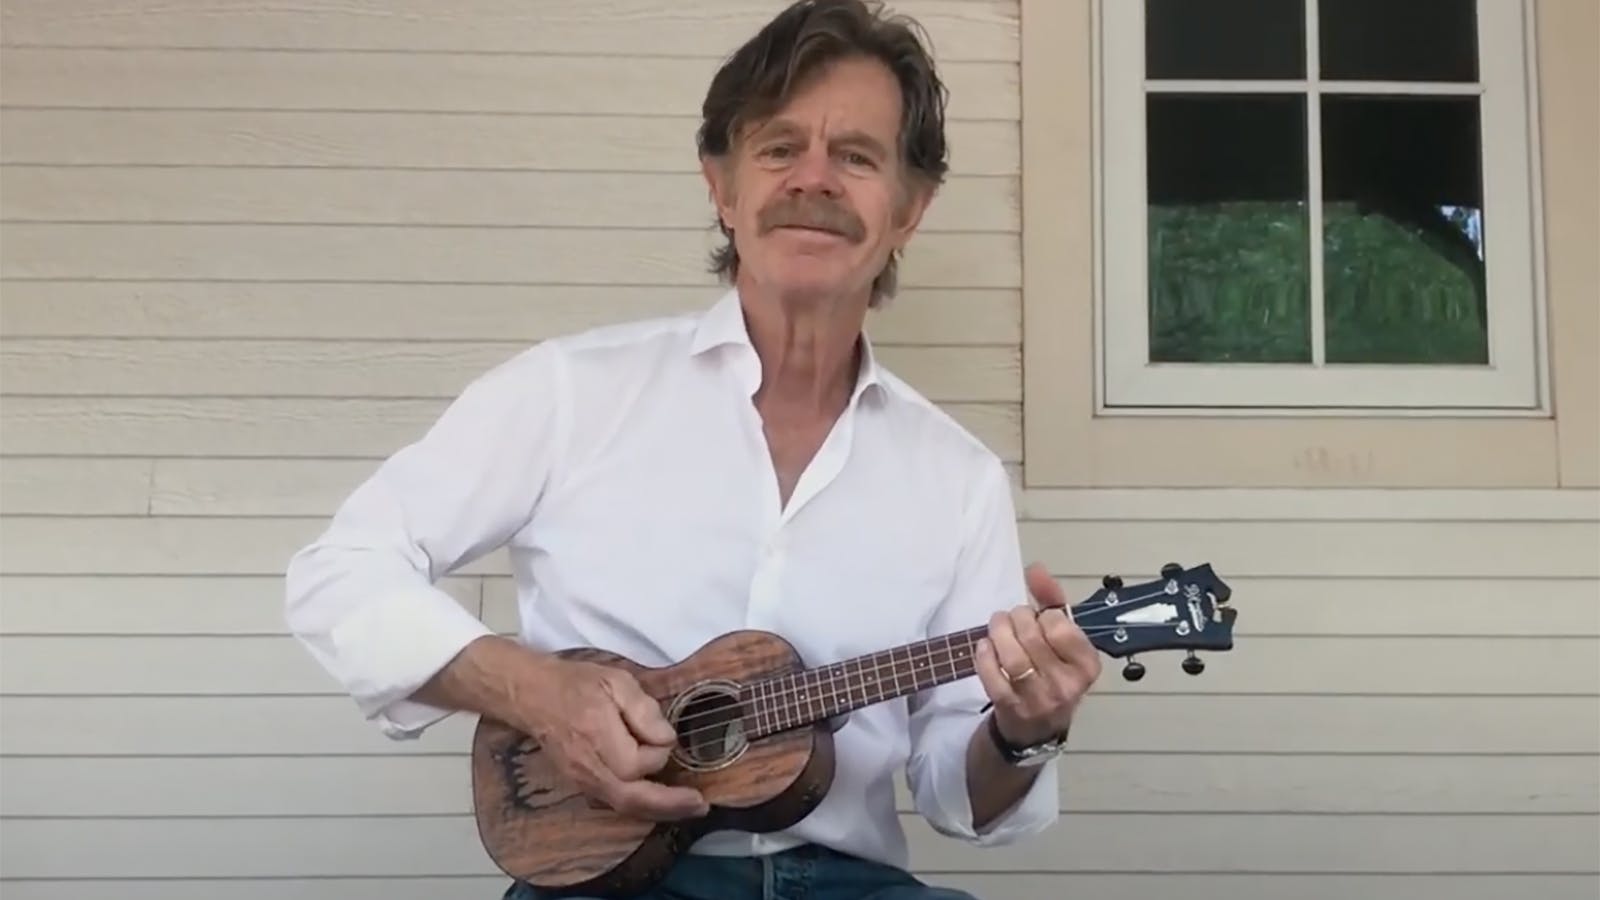 Actor William H. Macy wears a white button-up and plays a baby guitar in front of an off-white home.